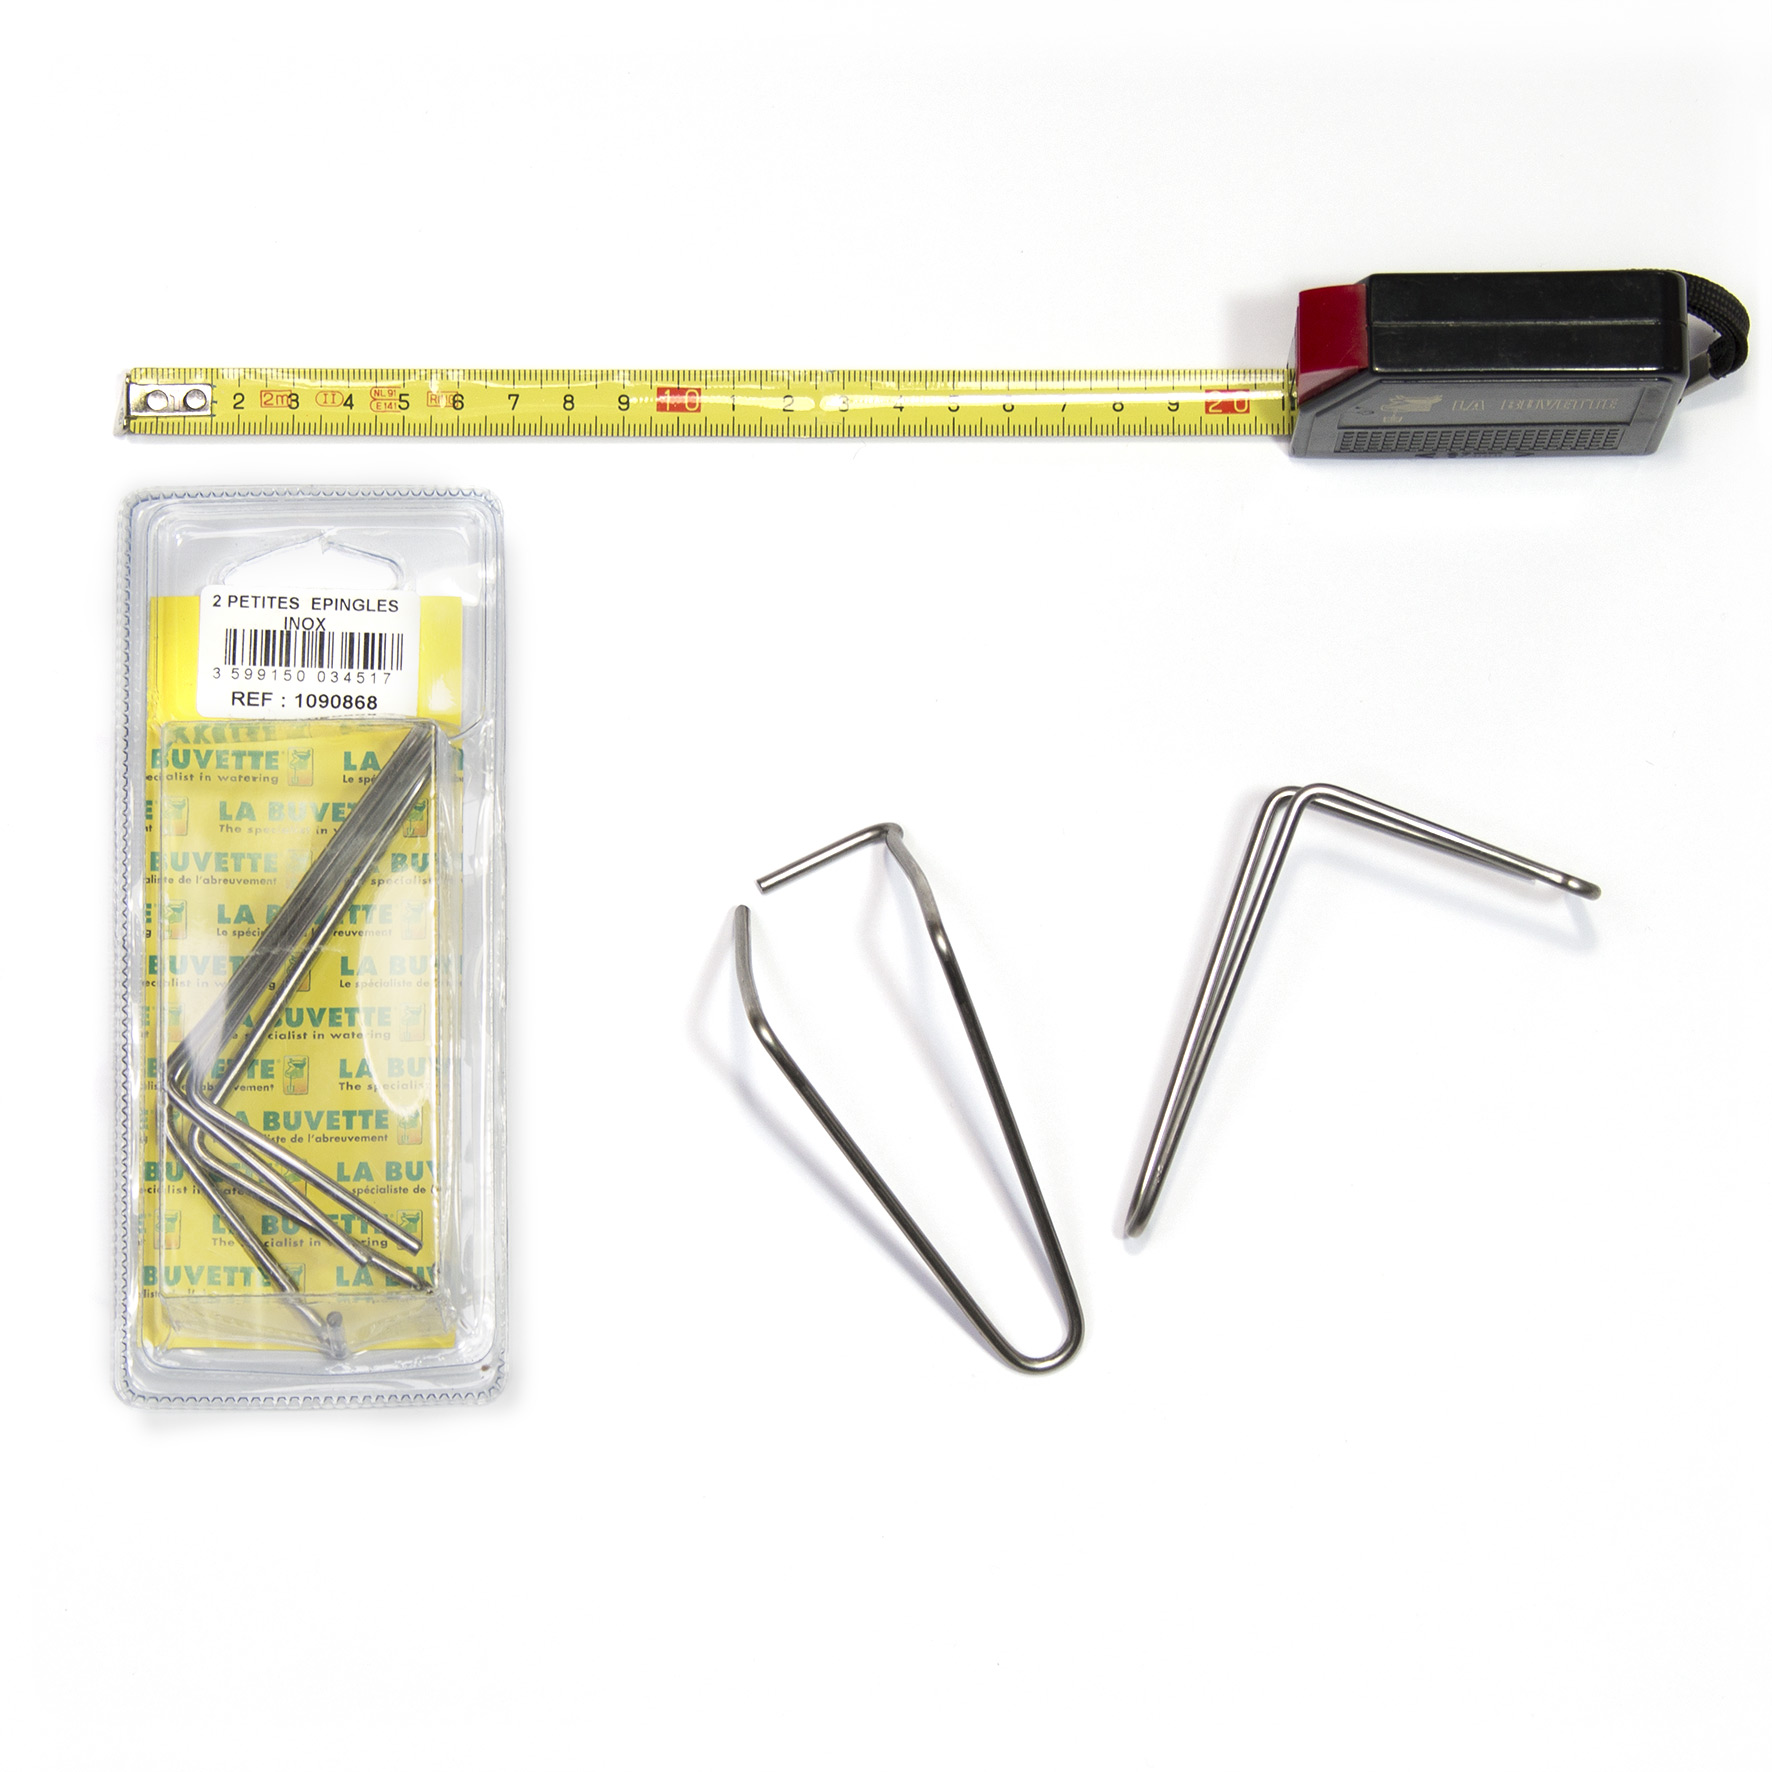 SMALL PIN BLISTER PACK